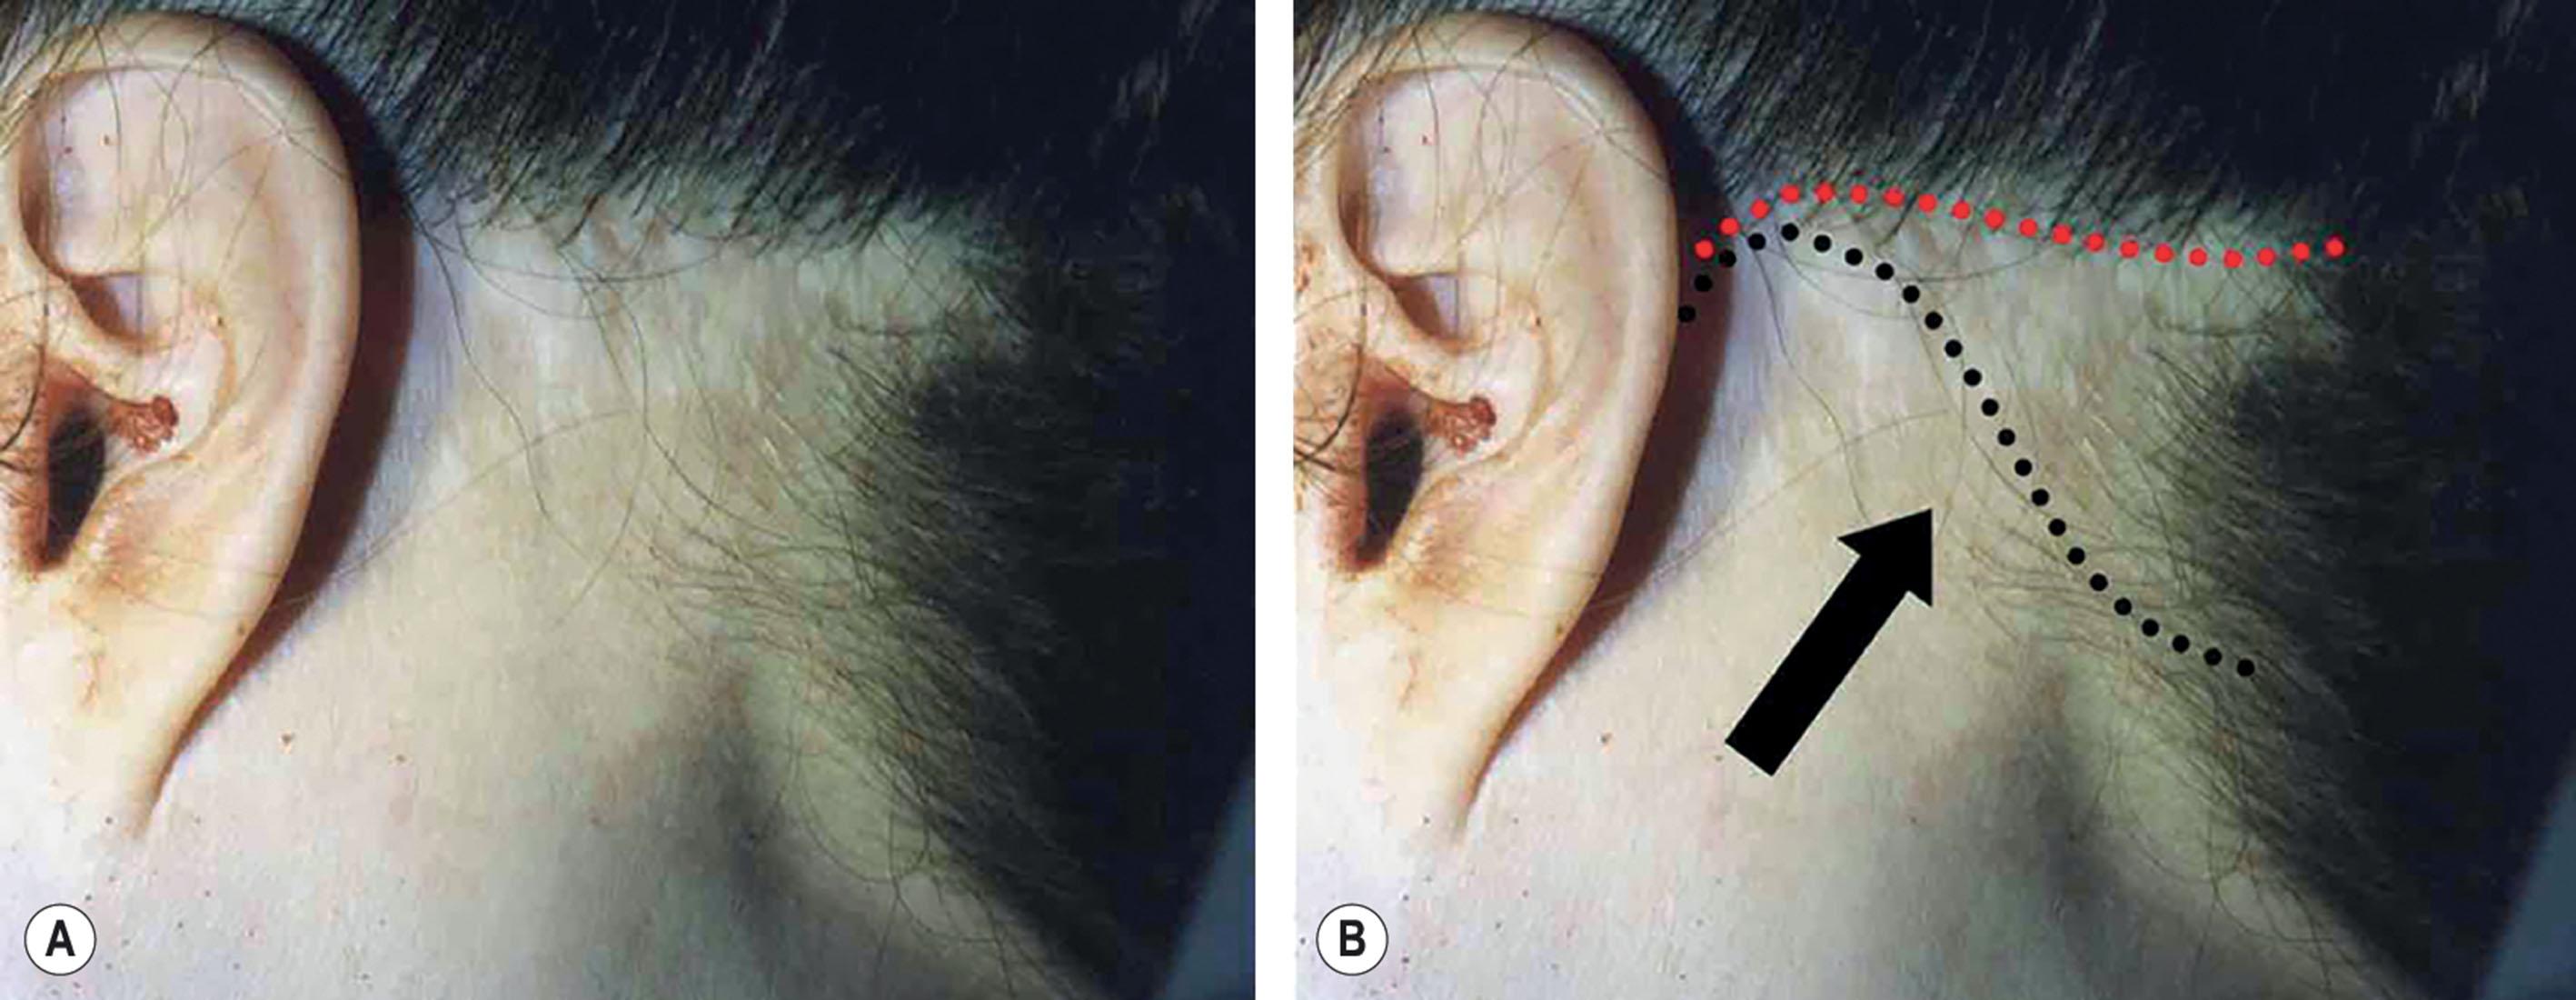 Figure 9.12.6, Understanding the cause of occipital hairline displacement. (A) An example of avoidable notching and displacement of the occipital hairline seen in a patient whose surgeon inappropriately used a traditional occipital incision plan (procedure performed by an unknown surgeon) (see also Fig. 9.12.7 ). (B) Deconstruction of the occipital hairline displacement seen in (A) . The surgeon made a well-intended, but conceptually flawed attempt to hide the scar in the occipital scalp (dotted red line) after underestimating the skin redundancy in the upper-lateral neck. Skin has been advanced (black arrow) into a position where scalp hair should be and the hairline is “notched”. The dotted black line shows the incision plan that would have prevented the problem.